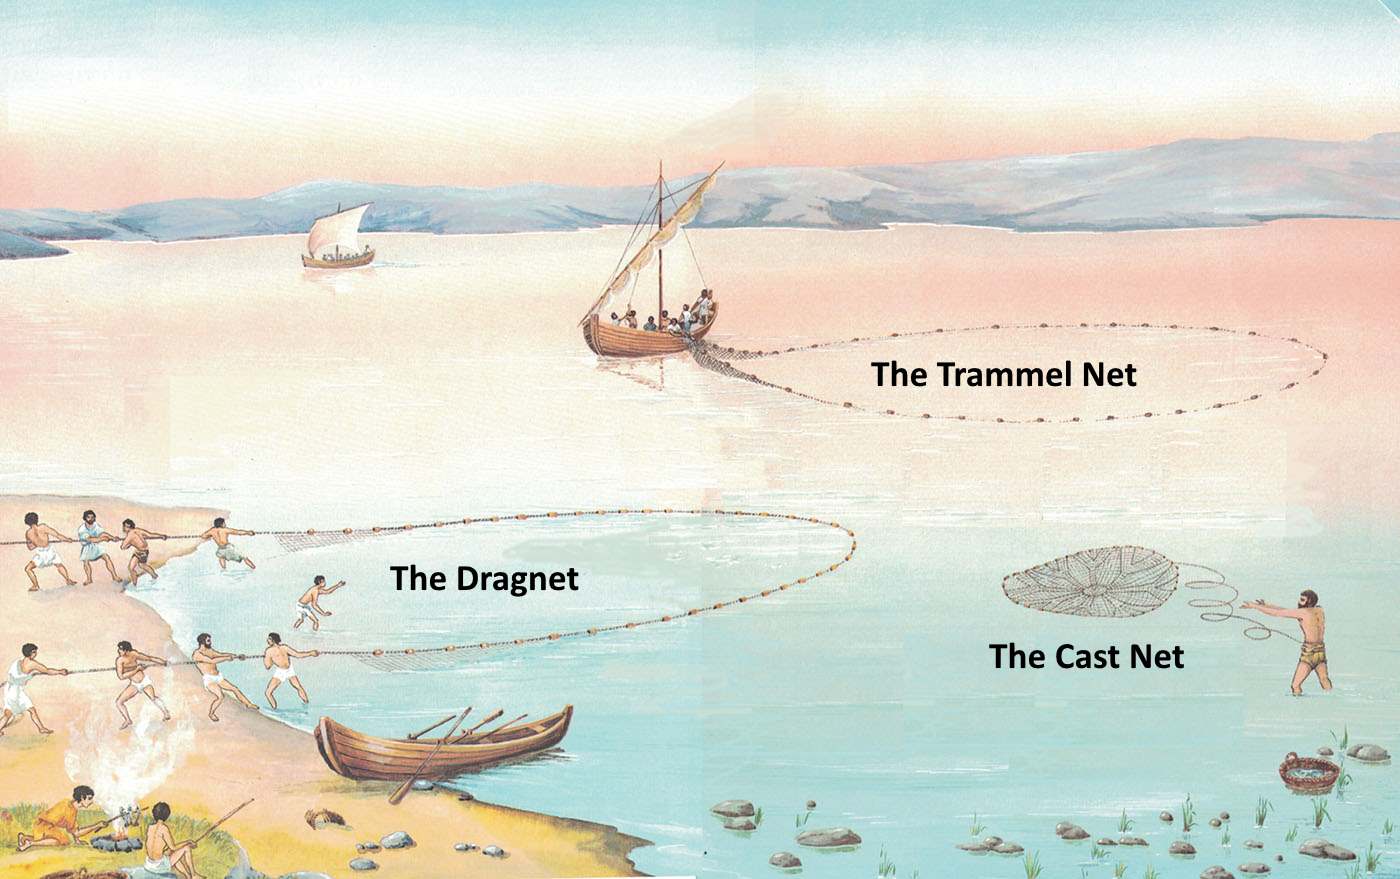 artwork of 3 ways to fish in Bible times, the dragnet, trammel and casting net